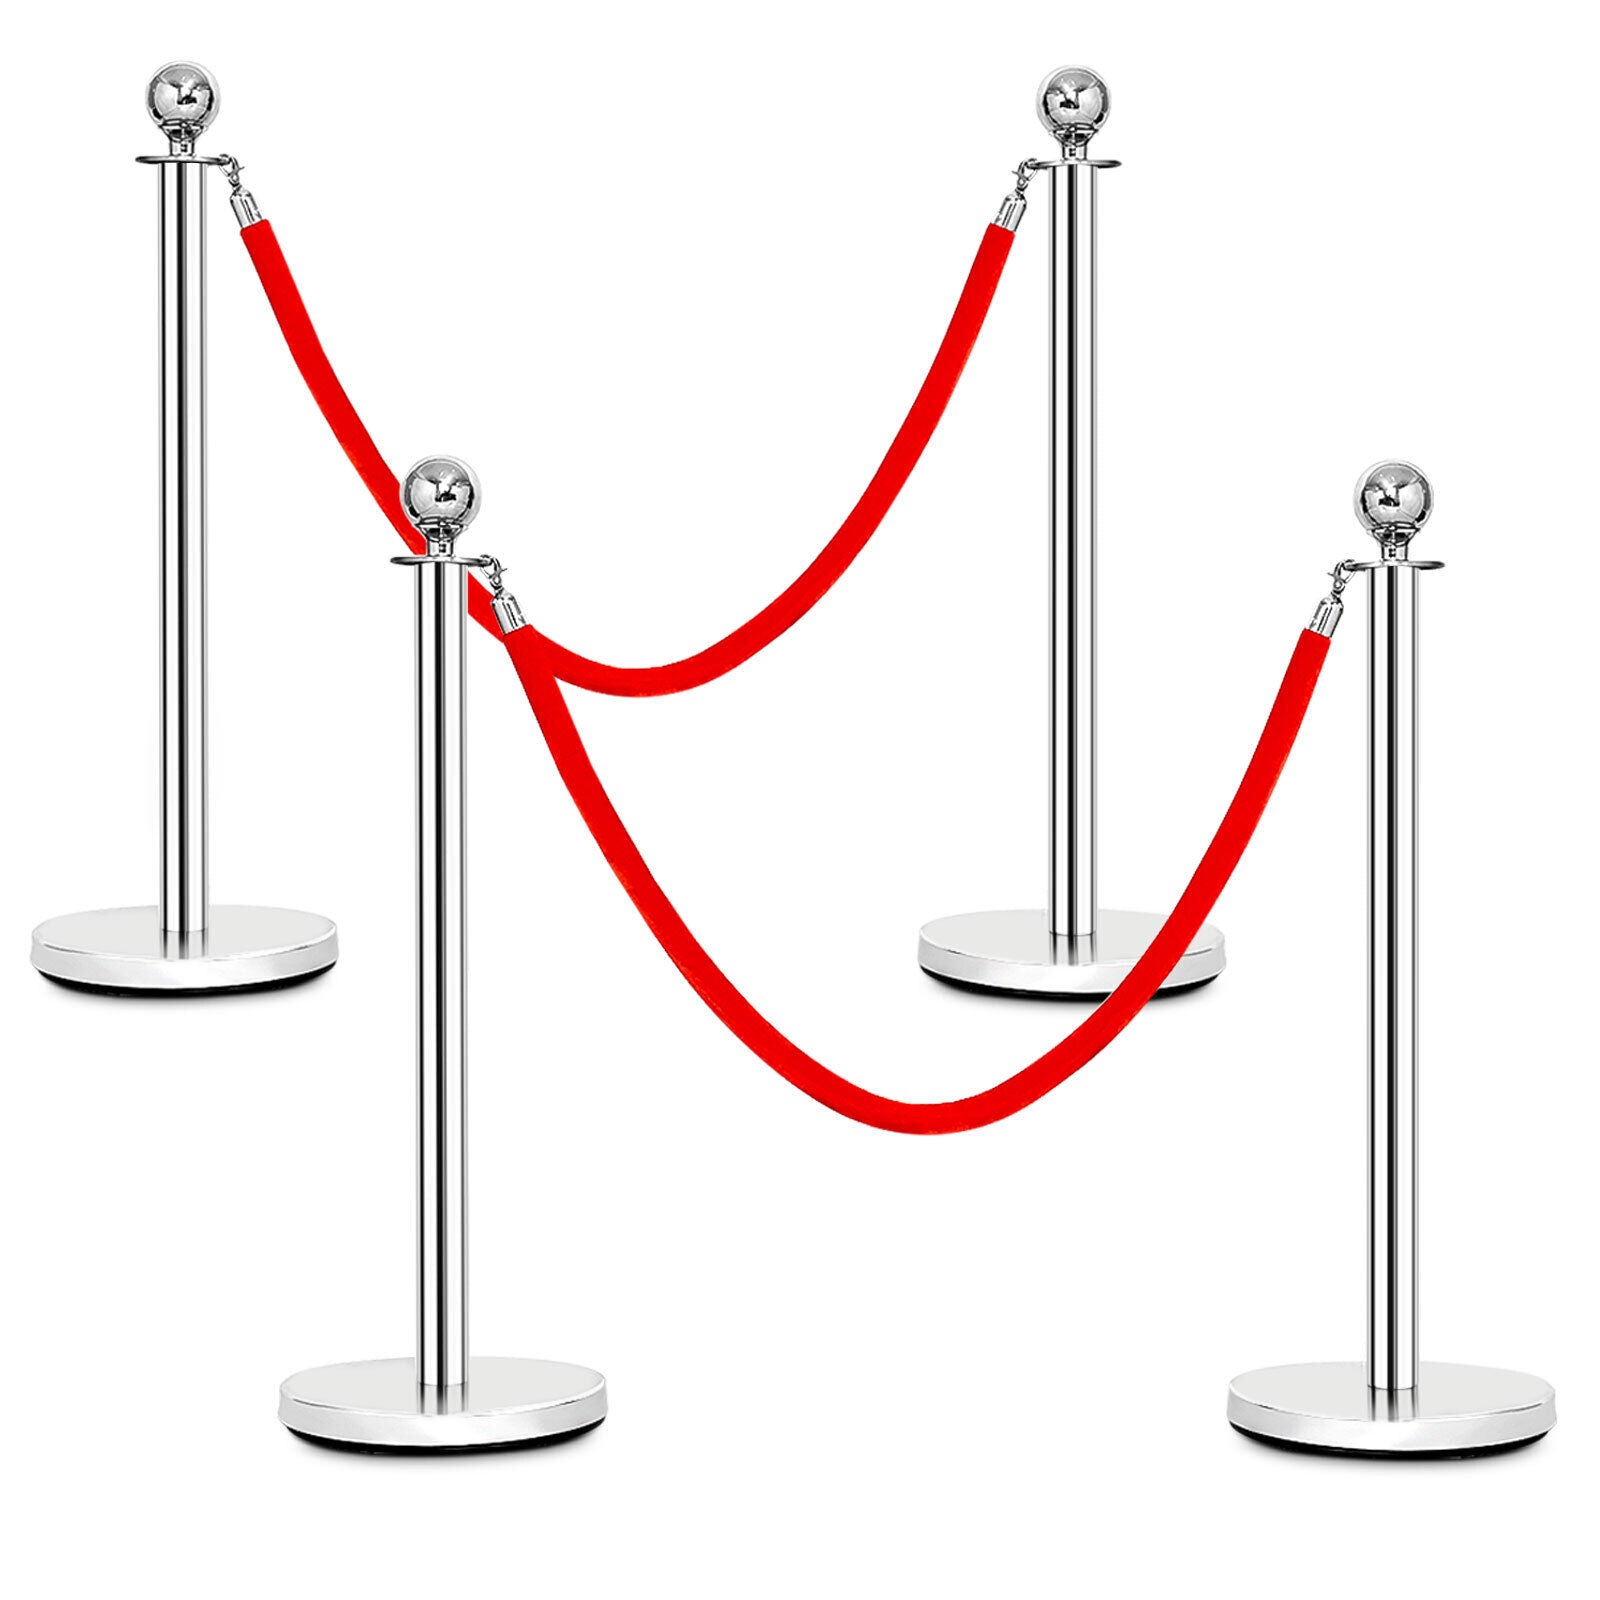 4Pcs Stainless Steel Barrier Posts with 2 Red Cords and Stands Cord for Exhibition